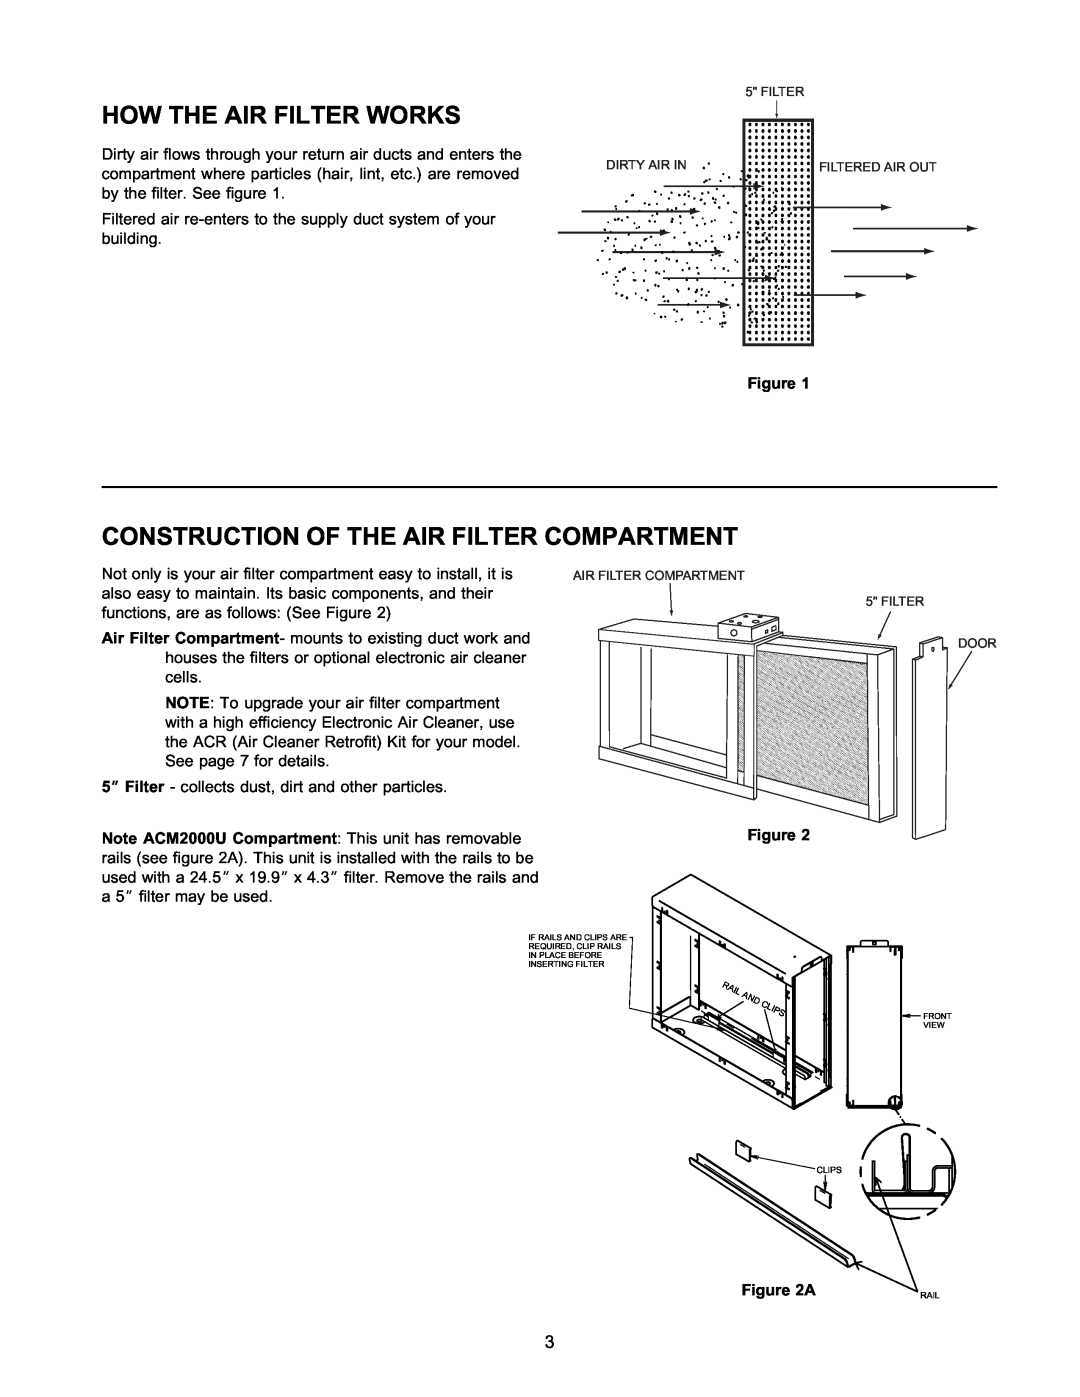 White Rodgers pmnACM/ACB owner manual How The Air Filter Works, Construction Of The Air Filter Compartment 